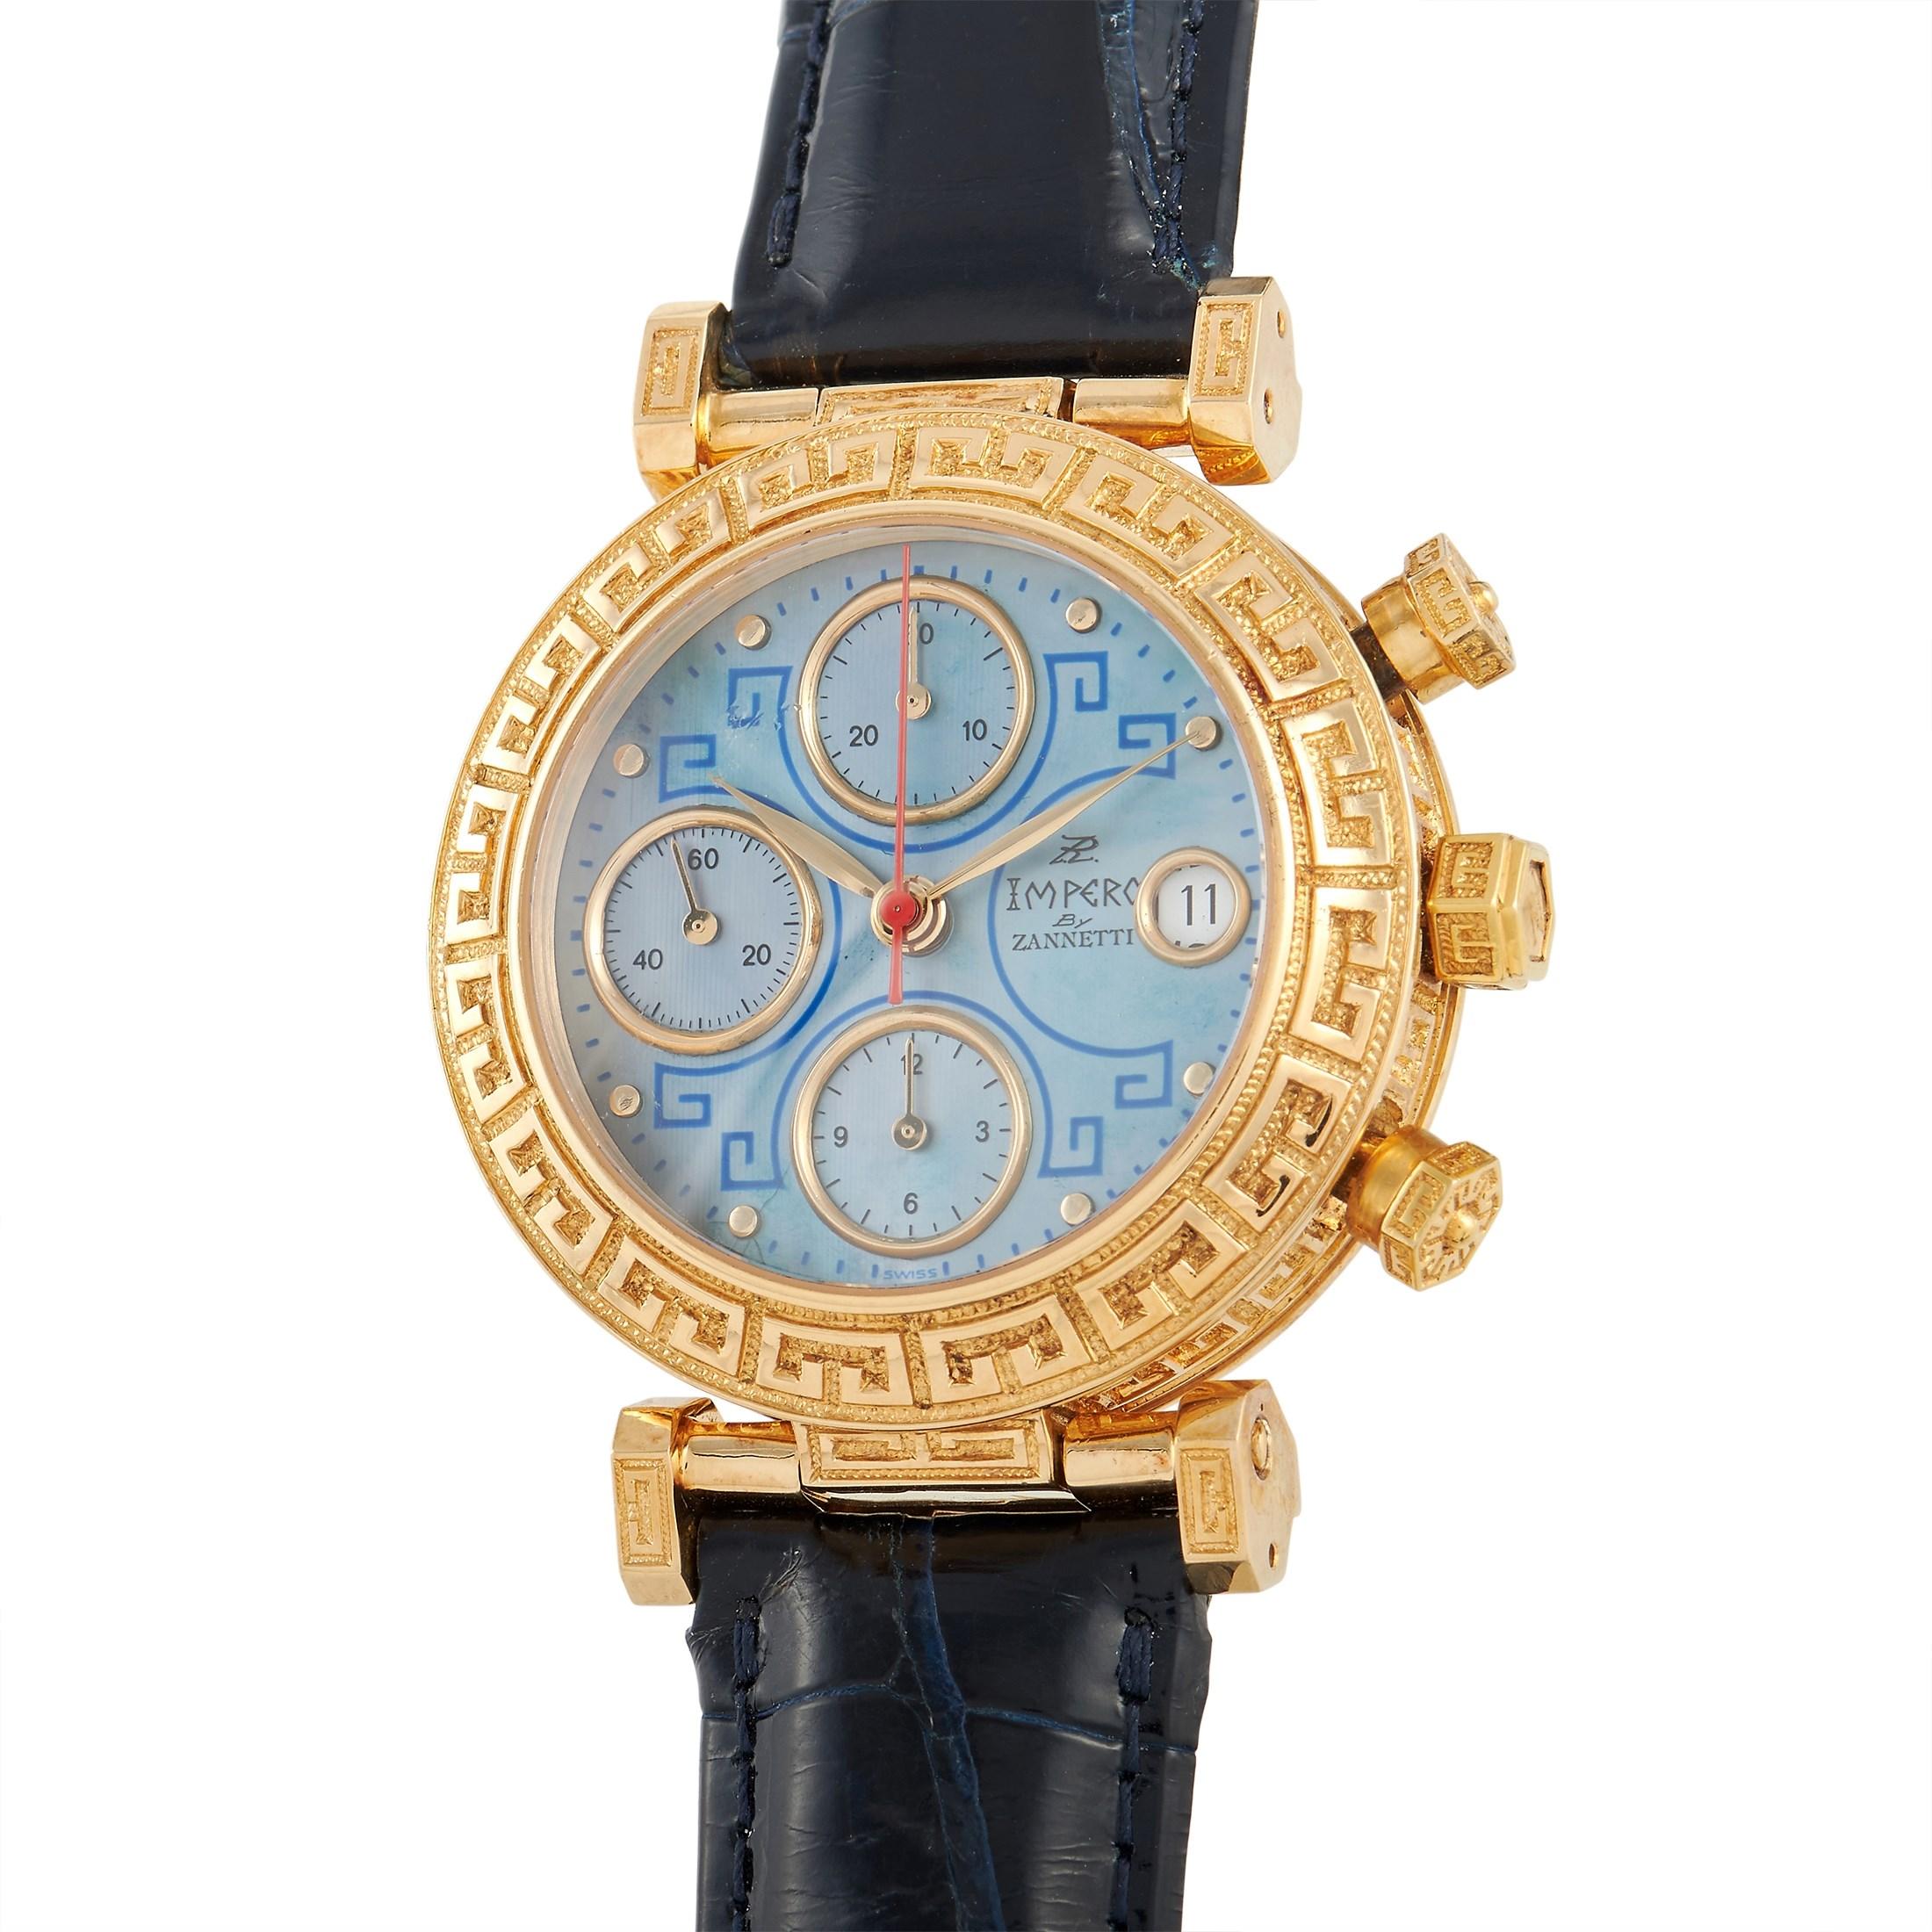 Exuding a bold and confident look is this handcrafted Zannetti Impero 18K Gold Chronograph Watch from circa 1989. This unique timepiece has an 18K yellow gold three-piece case with a hand-engraved bezel. It has a Mother of Pearl dial with enameled